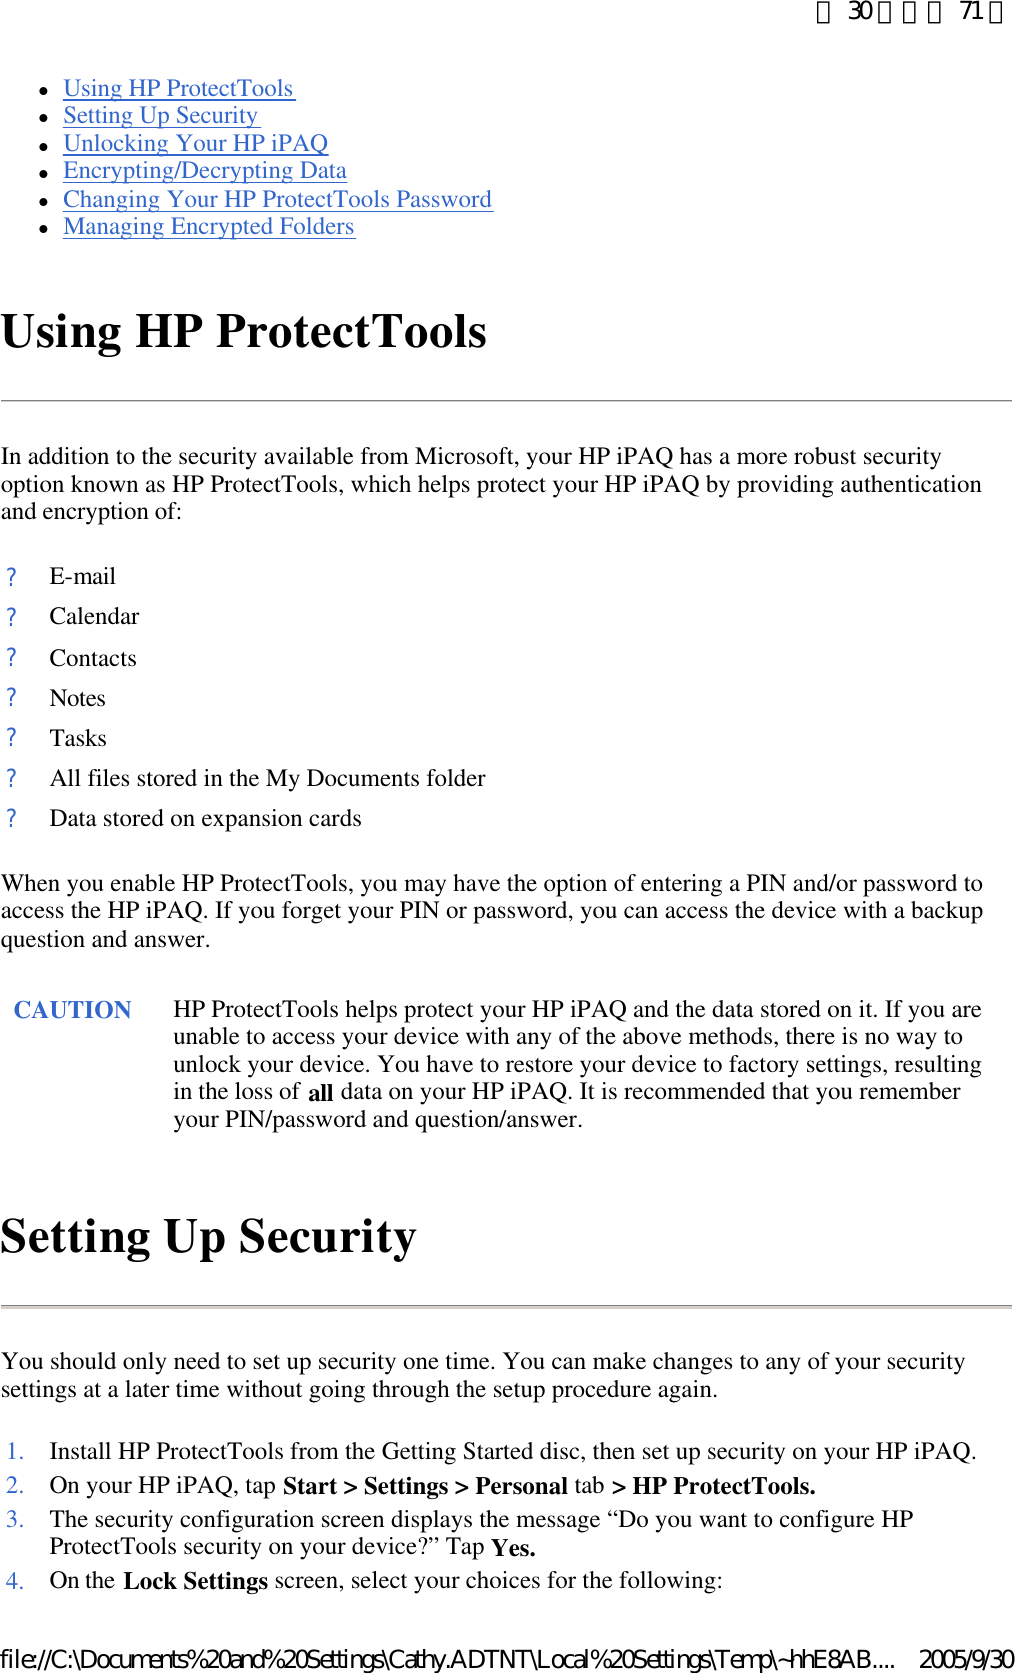 lUsing HP ProtectTools  lSetting Up Security  lUnlocking Your HP iPAQ  lEncrypting/Decrypting Data  lChanging Your HP ProtectTools Password  lManaging Encrypted Folders  Using HP ProtectTools In addition to the security available from Microsoft, your HP iPAQ has a more robust security option known as HP ProtectTools, which helps protect your HP iPAQ by providing authentication and encryption of:  When you enable HP ProtectTools, you may have the option of entering a PIN and/or password to access the HP iPAQ. If you forget your PIN or password, you can access the device with a backup question and answer.  Setting Up Security You should only need to set up security one time. You can make changes to any of your security settings at a later time without going through the setup procedure again.  ?E-mail?Calendar?Contacts?Notes?Tasks?All files stored in the My Documents folder?Data stored on expansion cardsCAUTION HP ProtectTools helps protect your HP iPAQ and the data stored on it. If you are unable to access your device with any of the above methods, there is no way to unlock your device. You have to restore your device to factory settings, resulting in the loss of all data on your HP iPAQ. It is recommended that you remember your PIN/password and question/answer.  1. Install HP ProtectTools from the Getting Started disc, then set up security on your HP iPAQ.2. On your HP iPAQ, tap Start &gt; Settings &gt; Personal tab &gt; HP ProtectTools.3. The security configuration screen displays the message “Do you want to configure HP ProtectTools security on your device?” Tap Yes.4. On the Lock Settings screen, select your choices for the following: 第 30 頁，共 71 頁2005/9/30file://C:\Documents%20and%20Settings\Cathy.ADTNT\Local%20Settings\Temp\~hhE8AB....